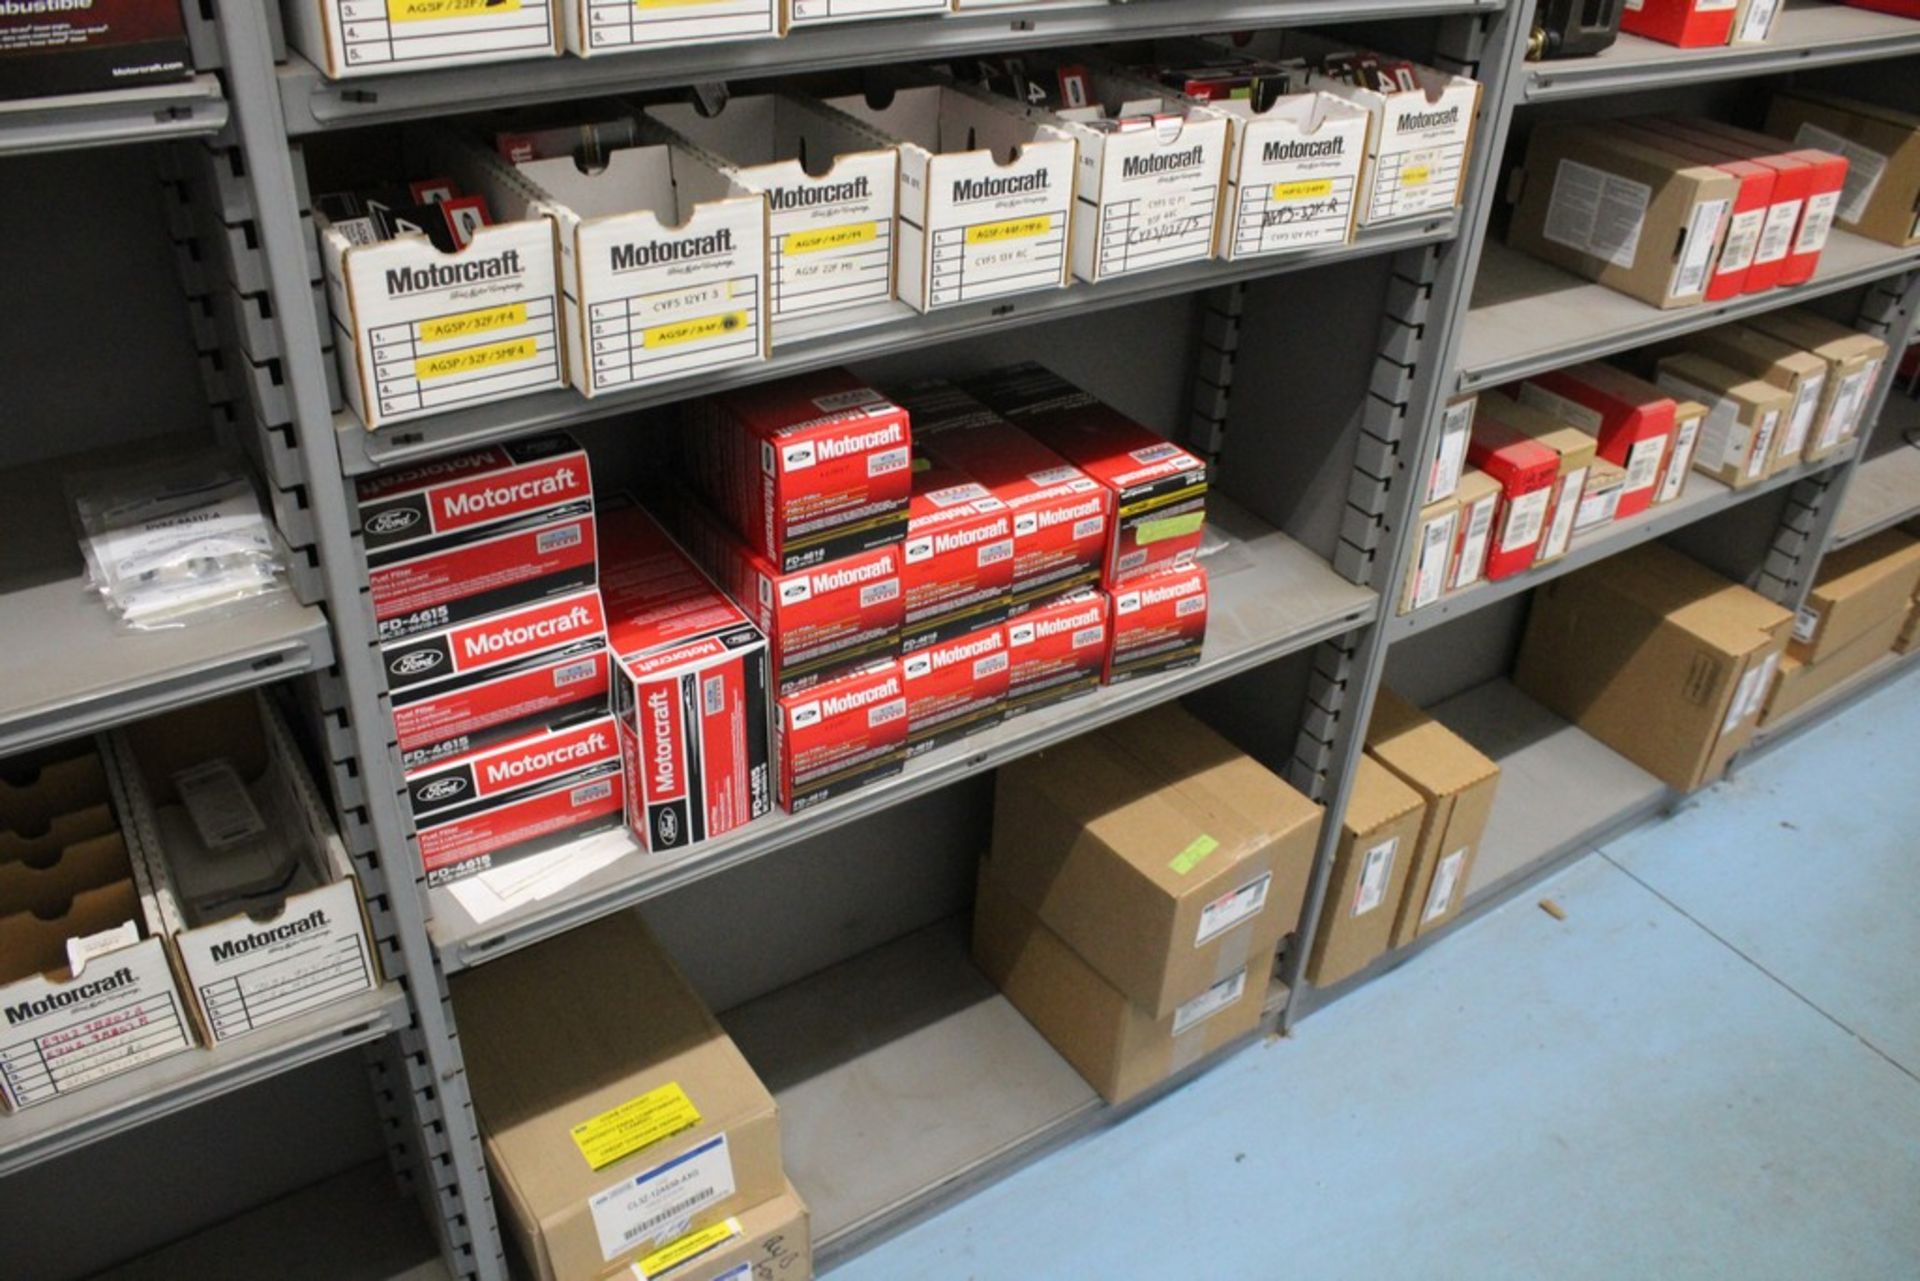 ASSORTED MOTORCRAFT FUEL FILTERS, SPARK PLUGS. COILS, SPARK PLUG WIRE, ETC. ON (8) SHELVES - Image 3 of 4